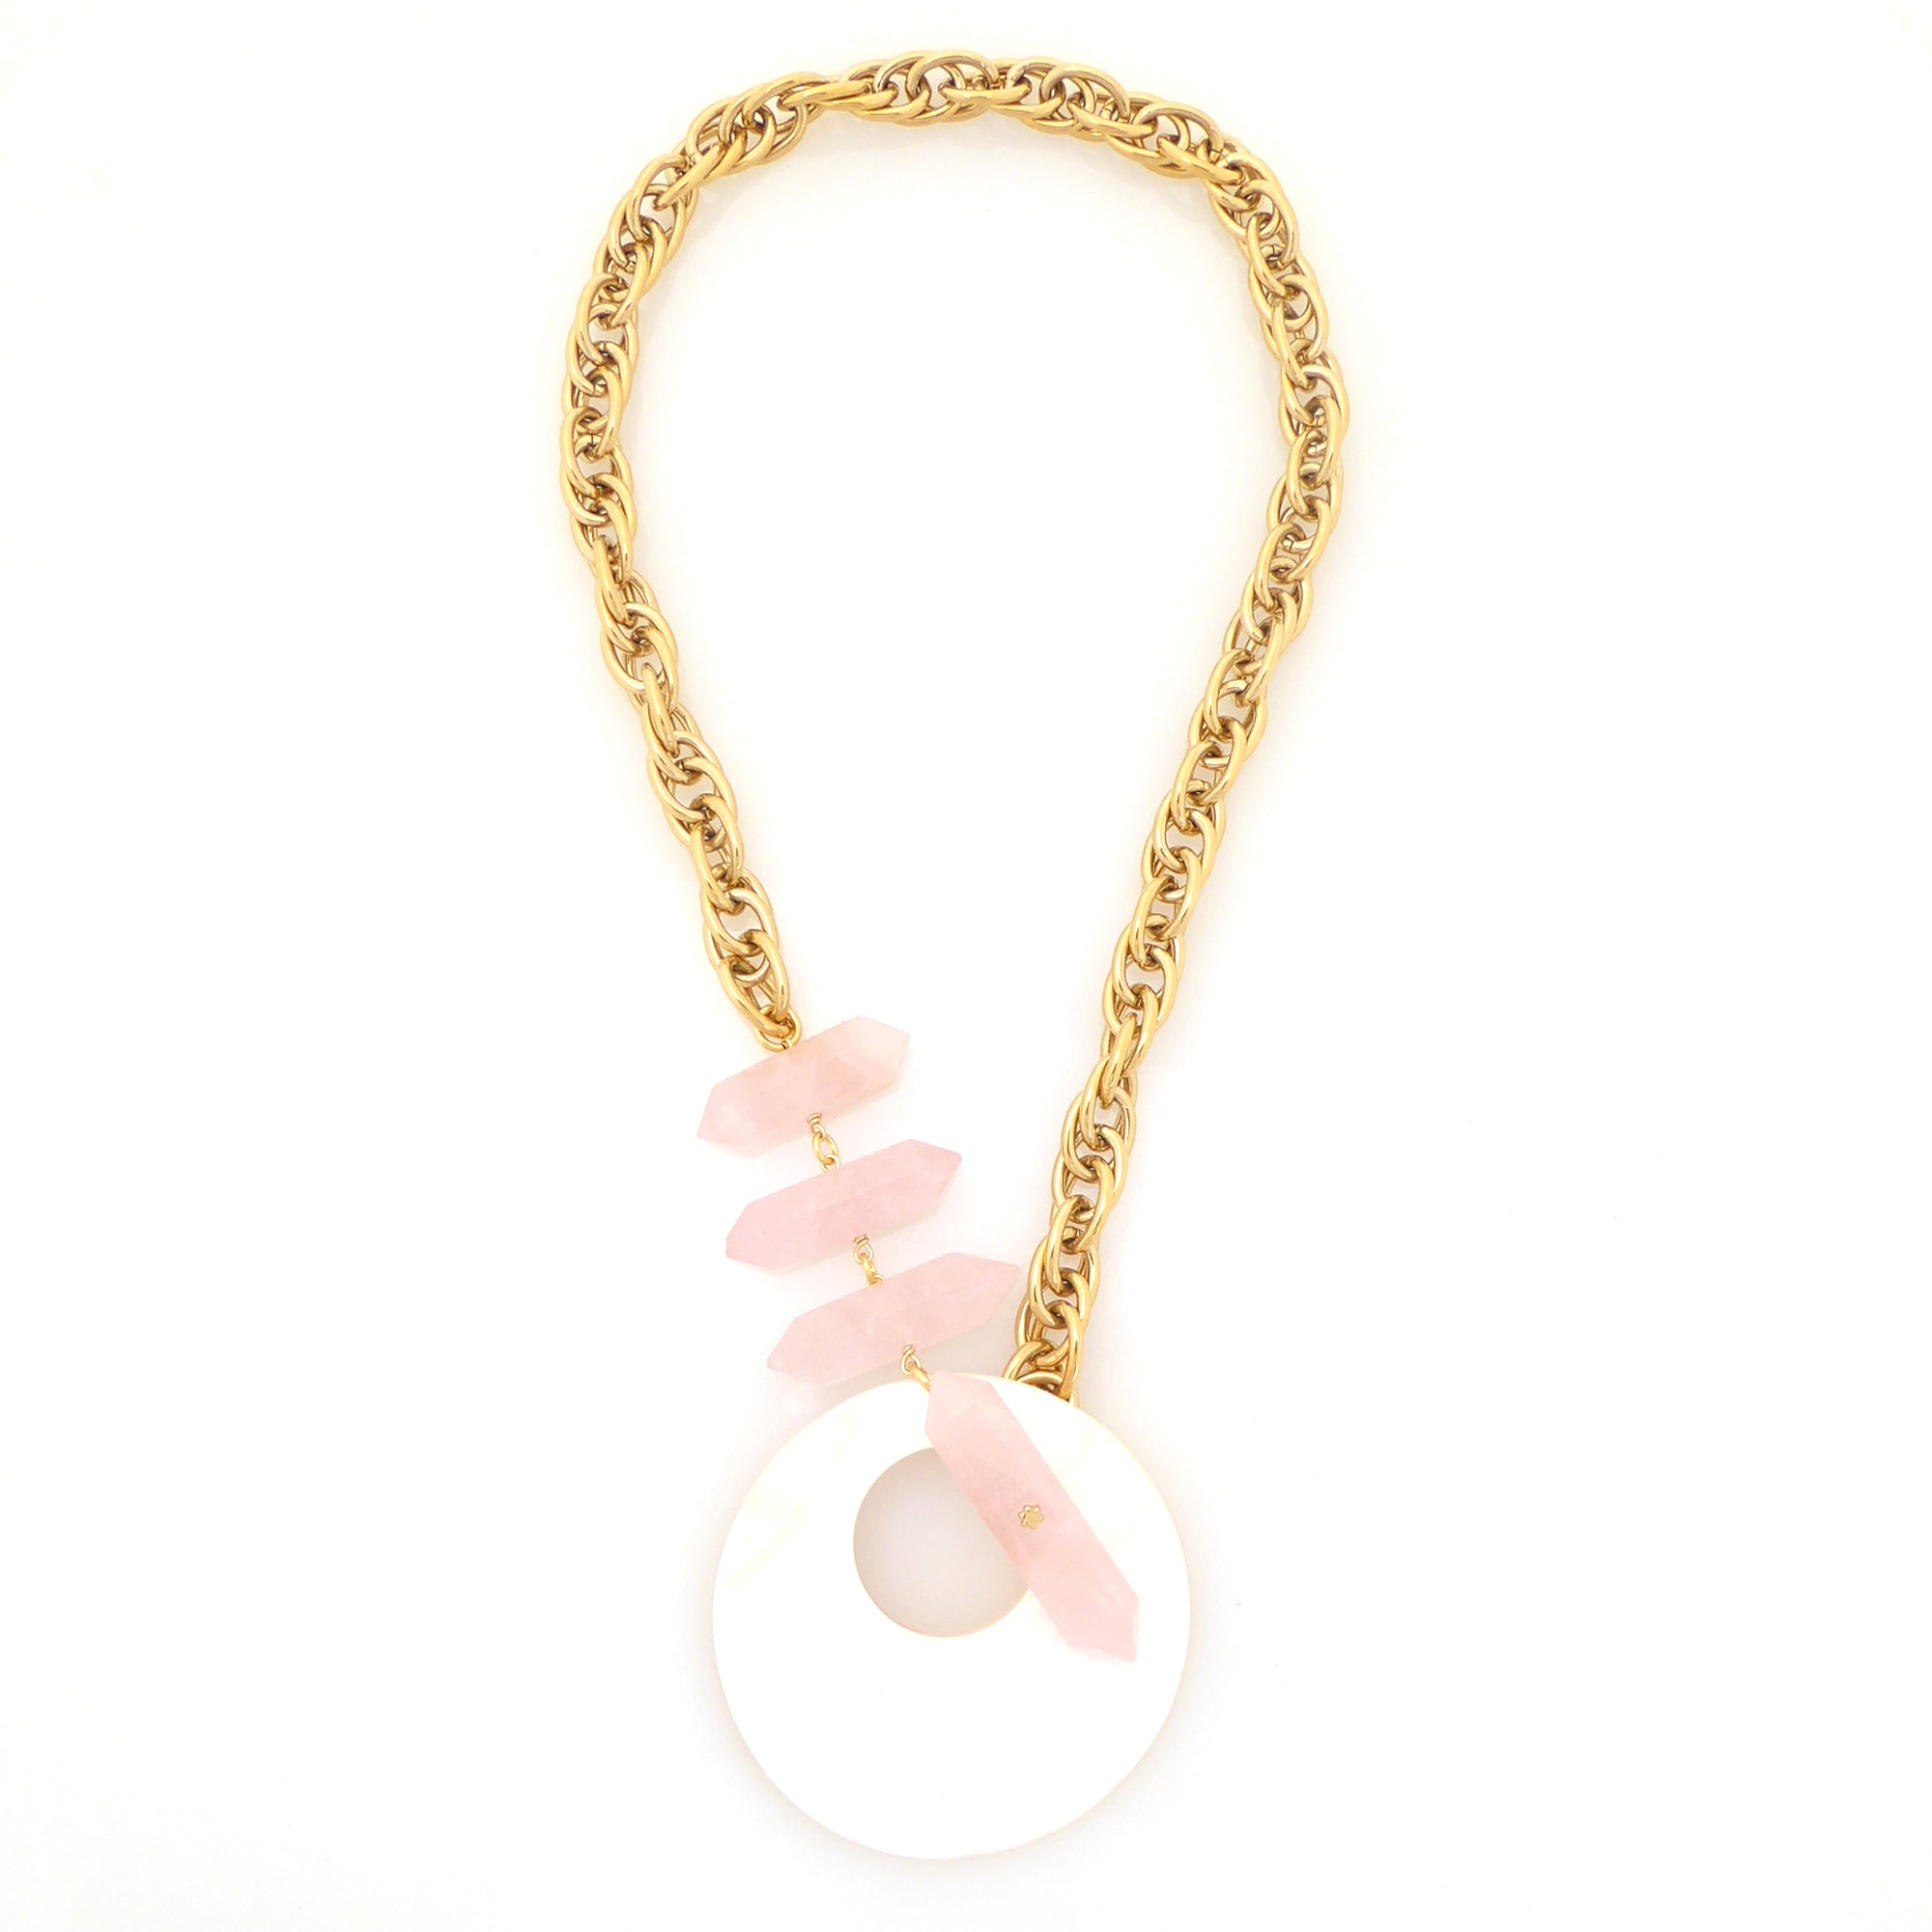 Marna rose quartz and shell necklace by Jenny Dayco 5